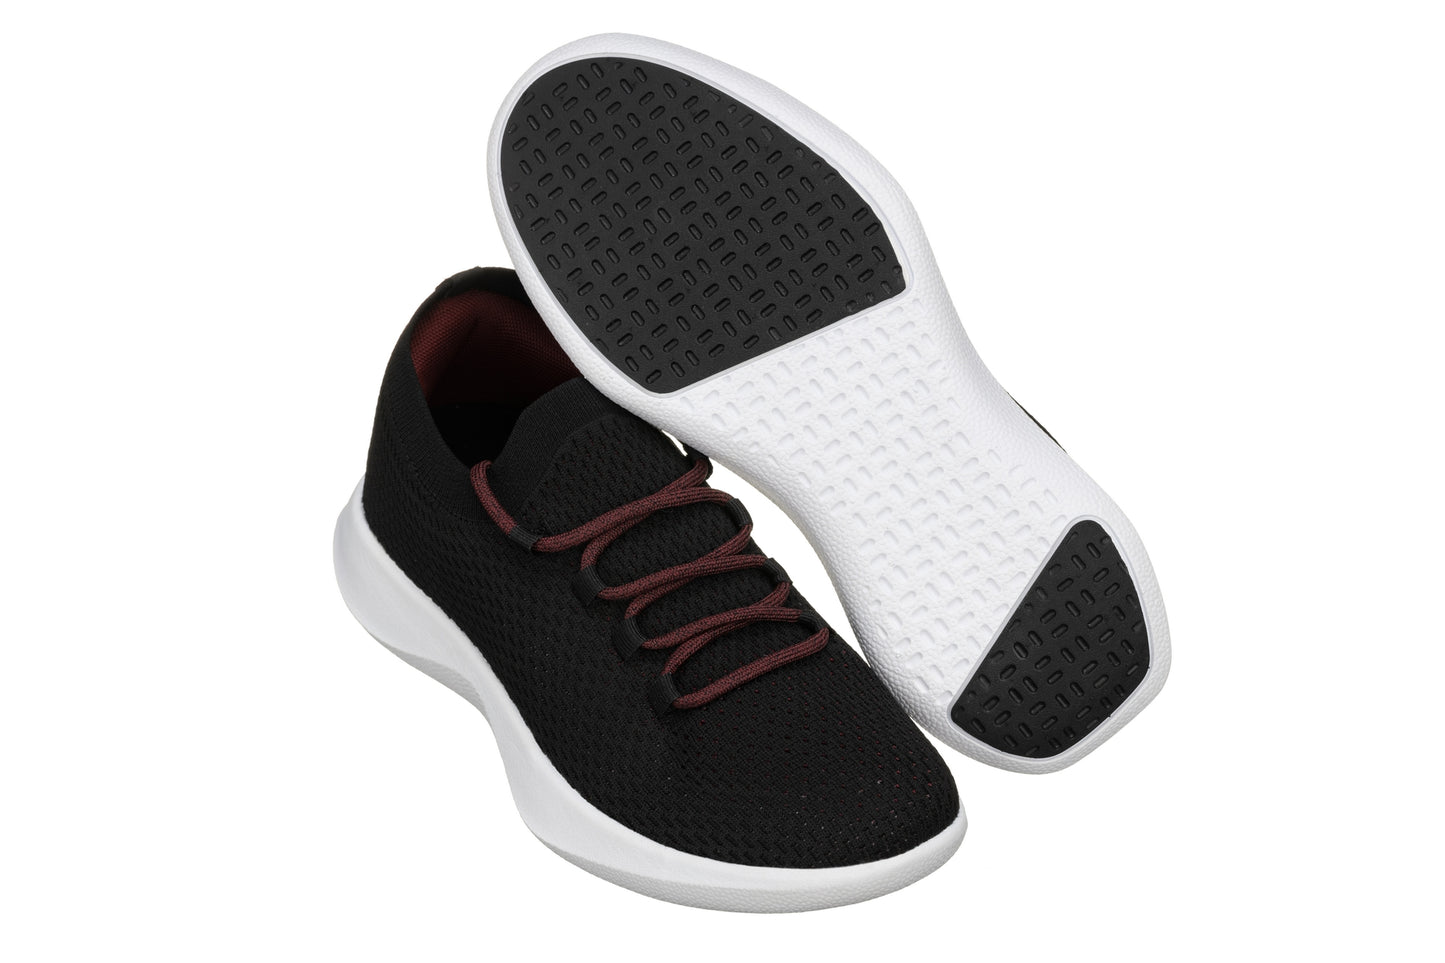 Elevator shoes height increase CALTO - Q085 - 2.4 Inches Taller (Black/Red) - Ultra Lightweight Sneakers